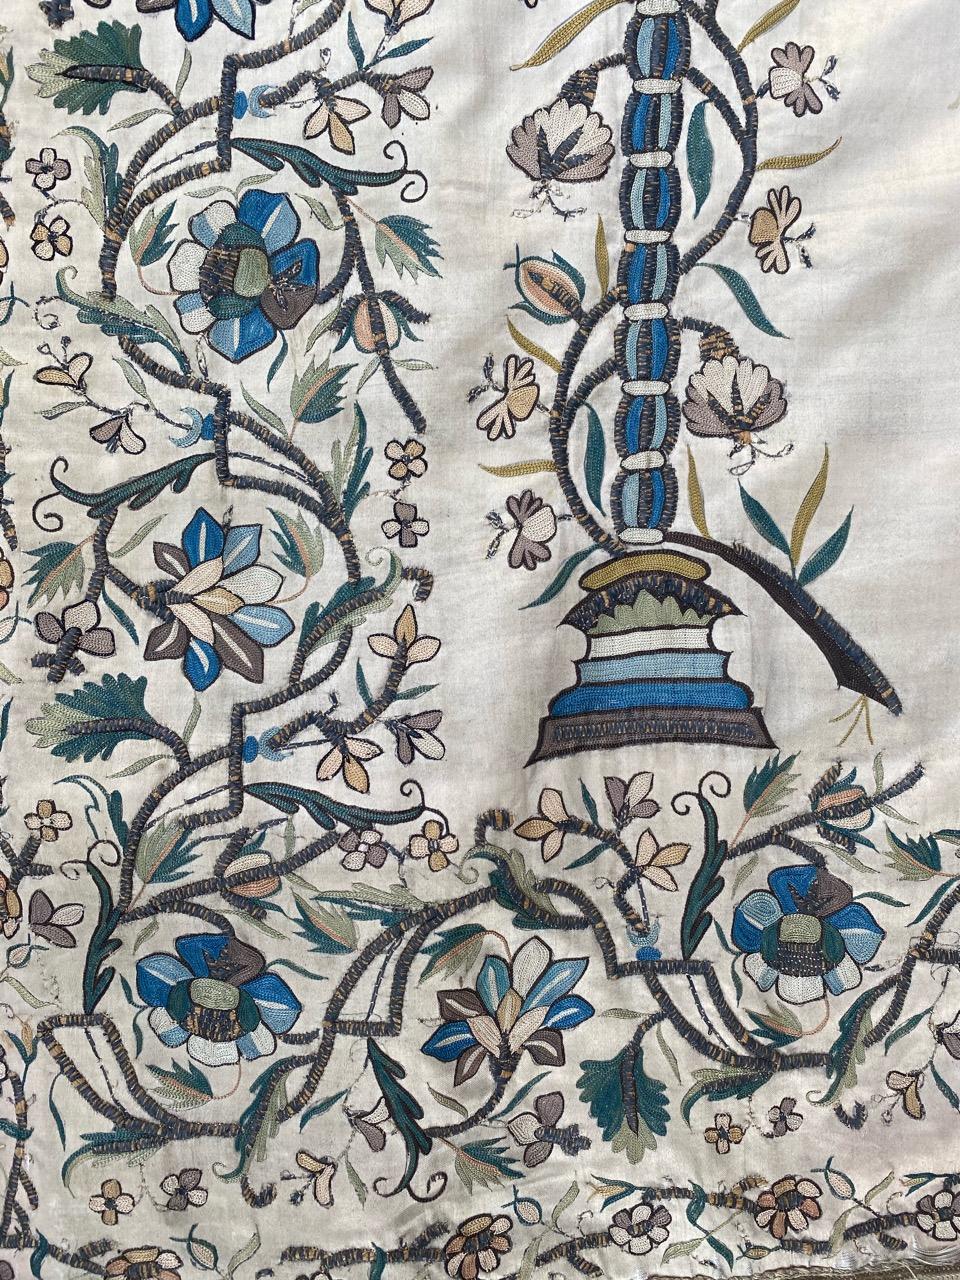 Beautiful and collectible mid-19th century ottoman embroidery with nice floral design and beautiful natural colors, entirely hand embroidered with silk and metal on silk foundation.

✨✨✨
